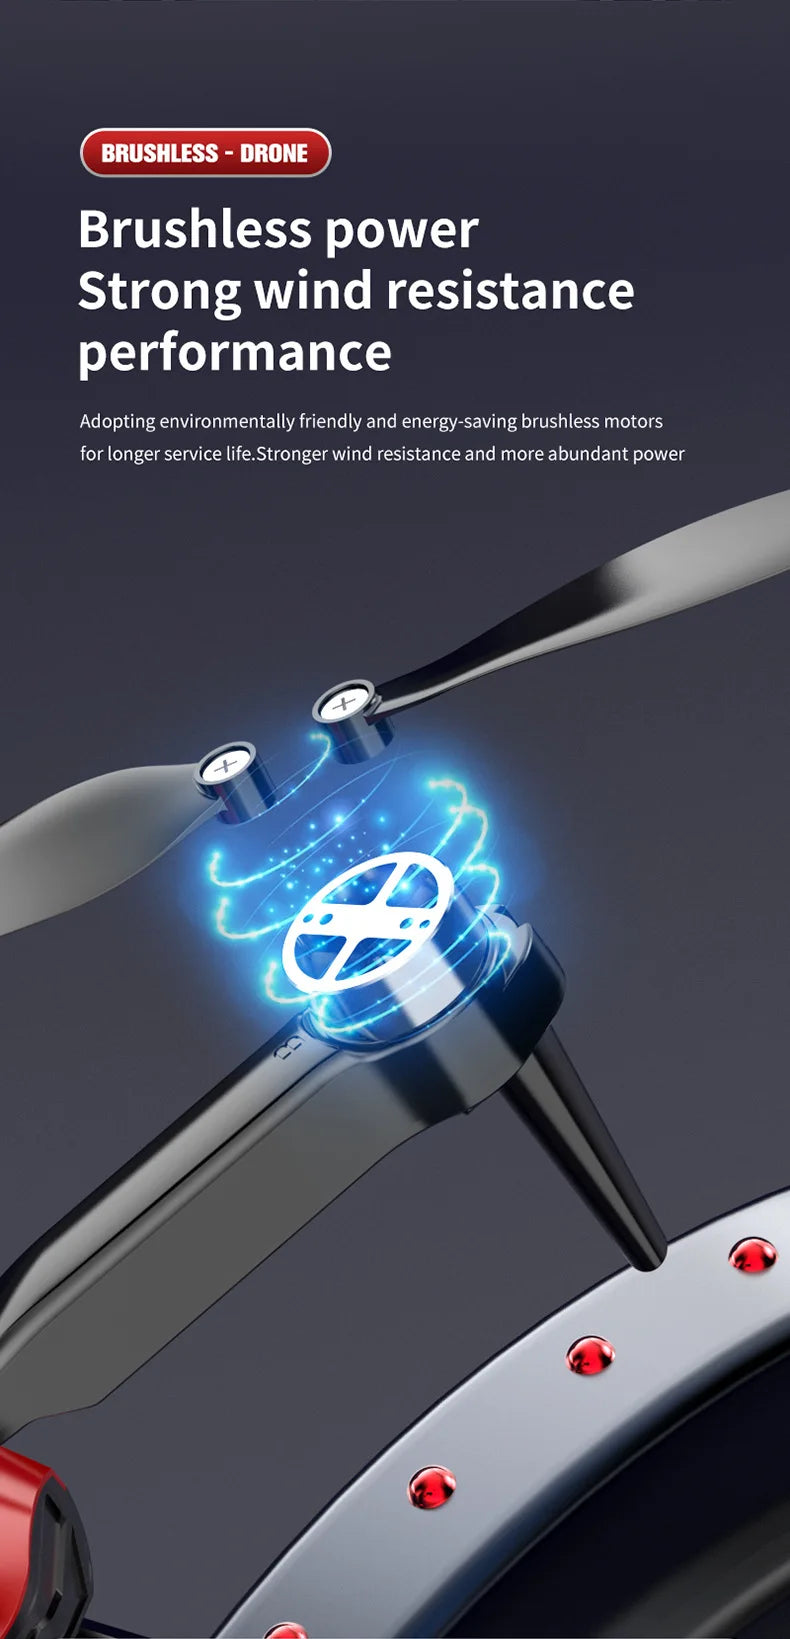 S178 L818 Drone, drone brushless power adopting environmentally friendly and energy-saving brushless